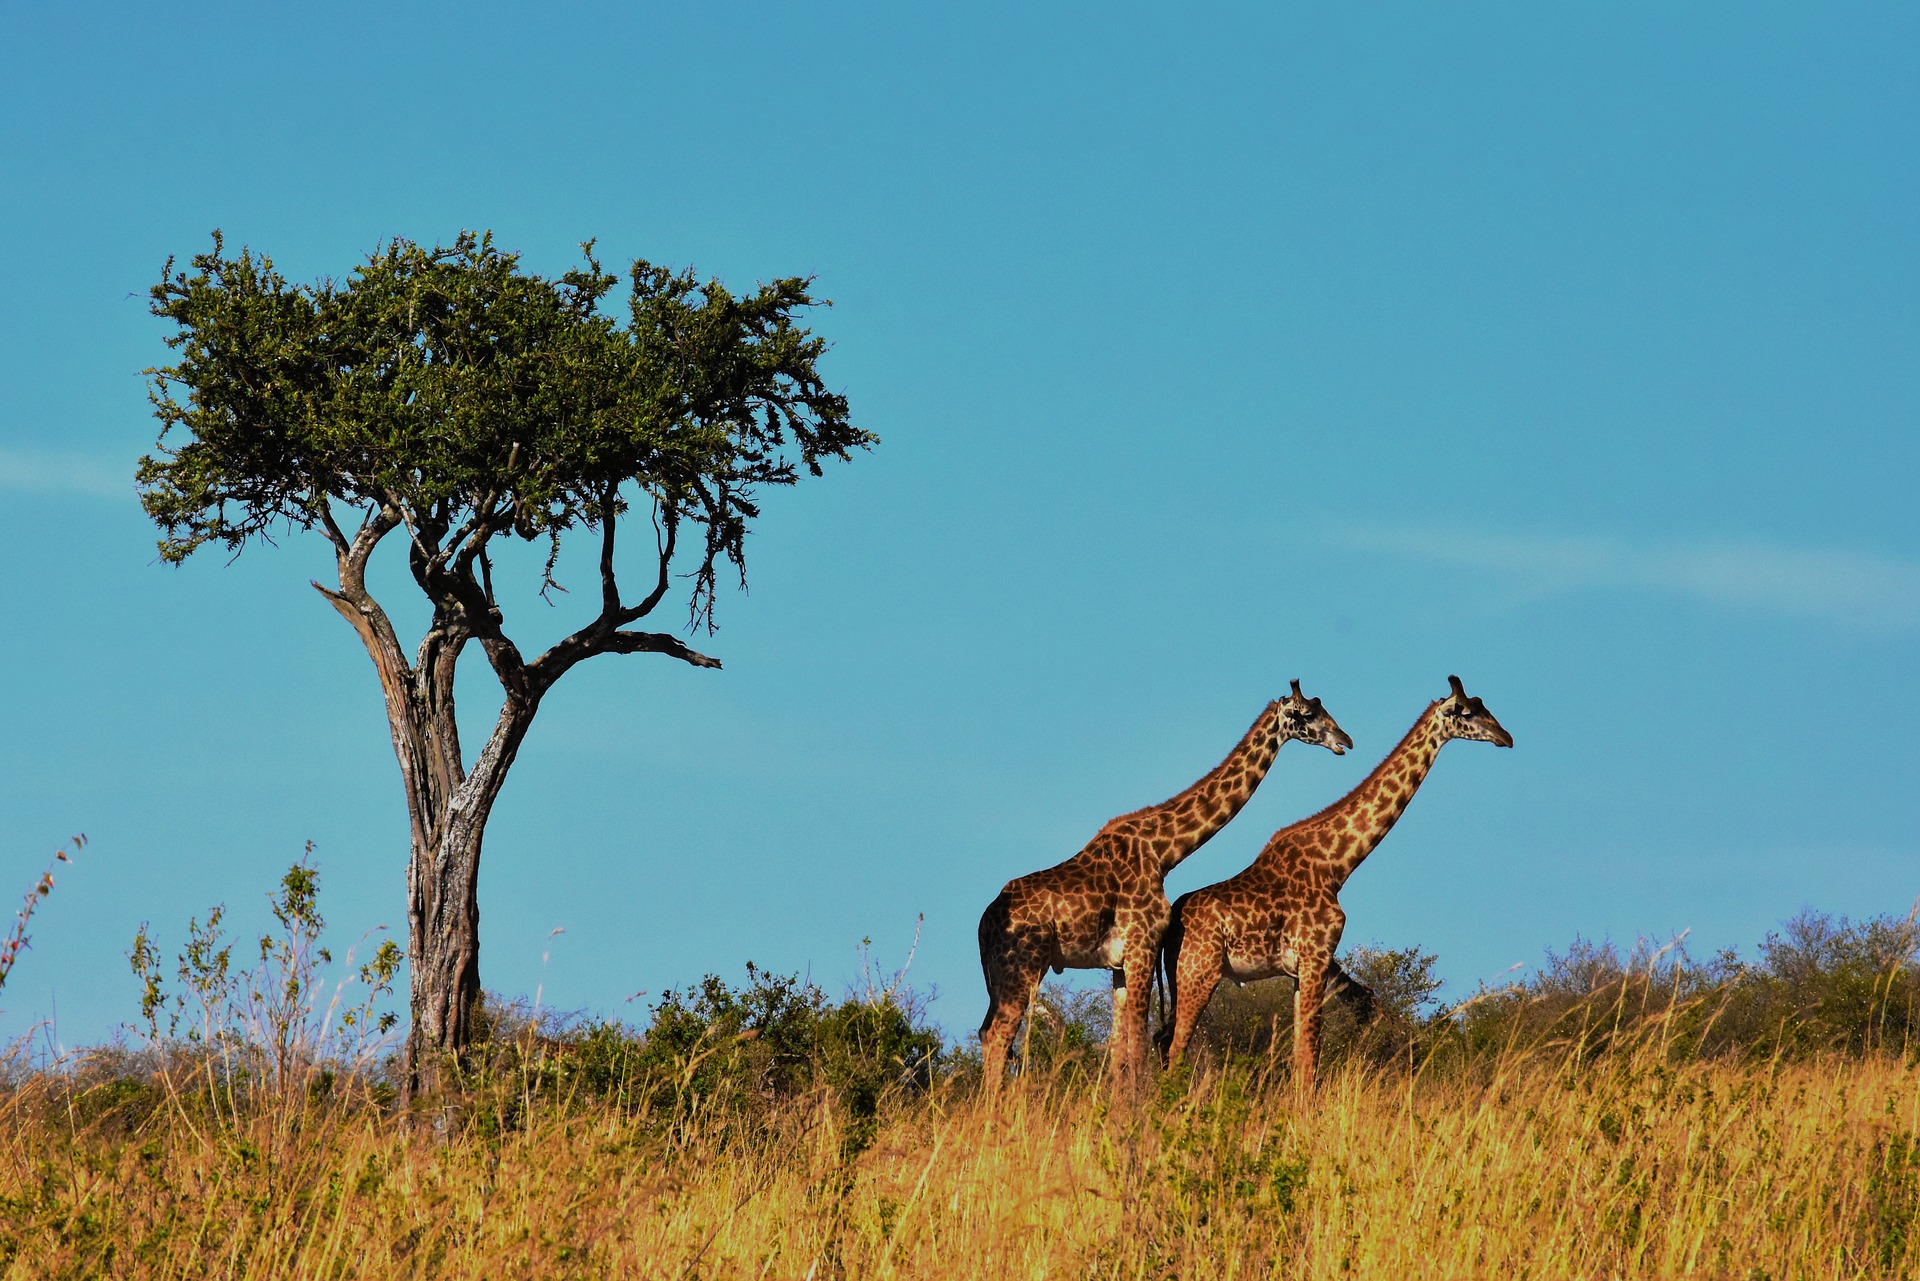 The Perfect East Africa Bucket List